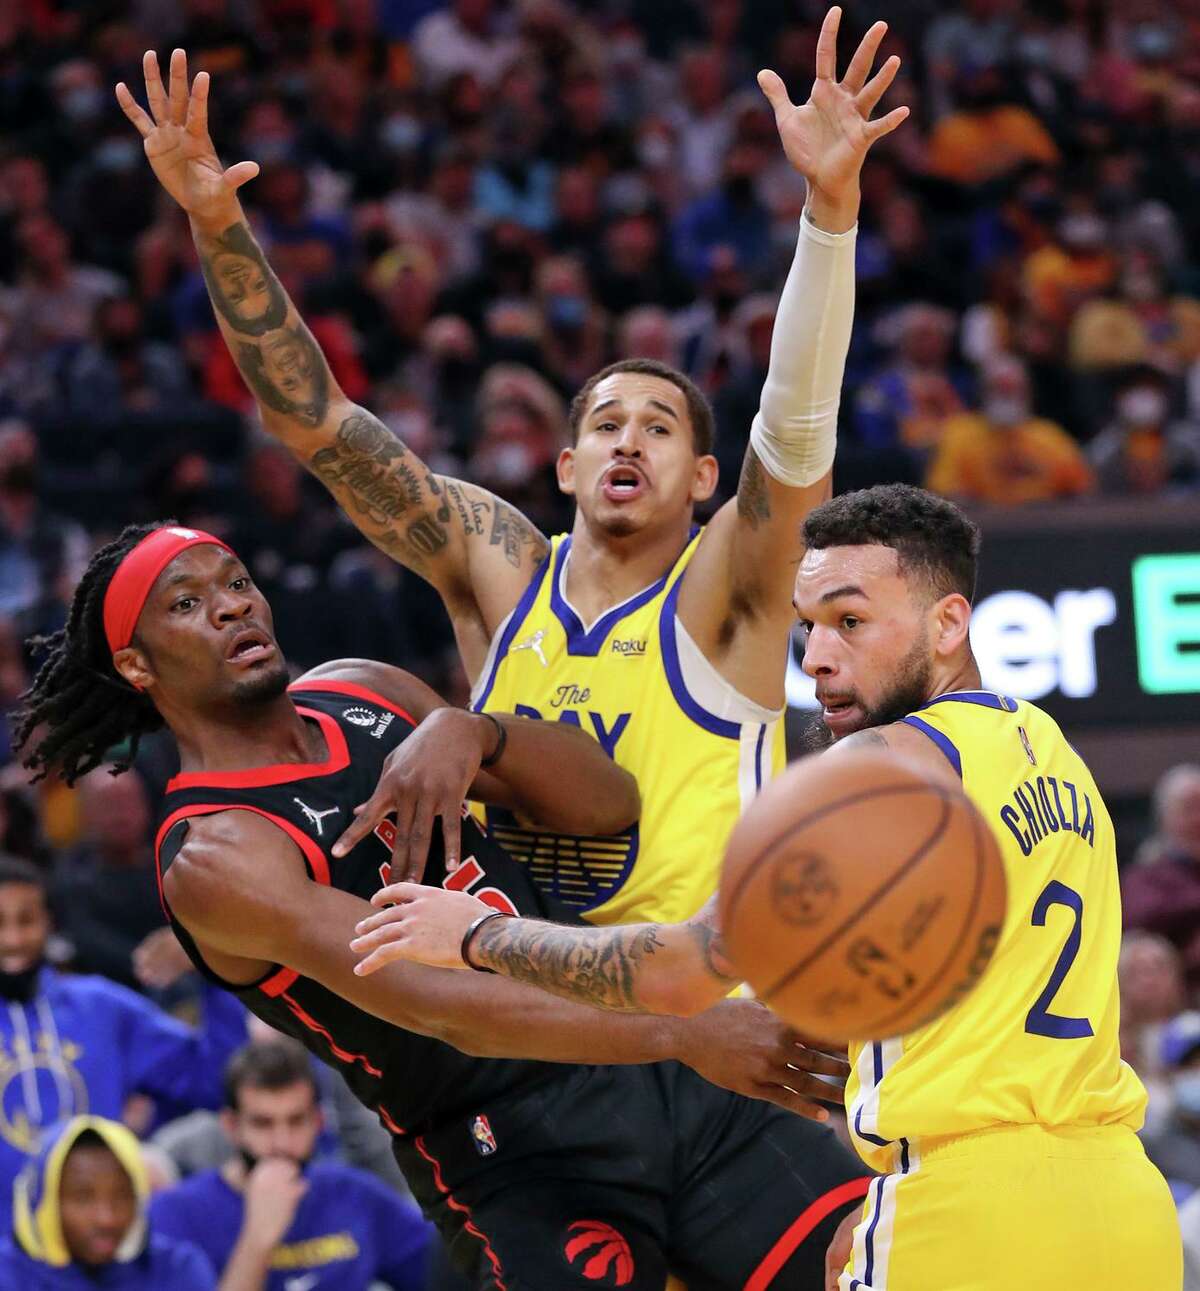 Toronto Raptors' Precious Achiuwa passes against defense of Golden State Warriors' Juan Toscano-Anderson and Chris Chiozza in 4th quarter during Warriors' 119-104 win in NBA game at Chase Center in San Francisco, Calif., on Sunday, November 21, 2021.